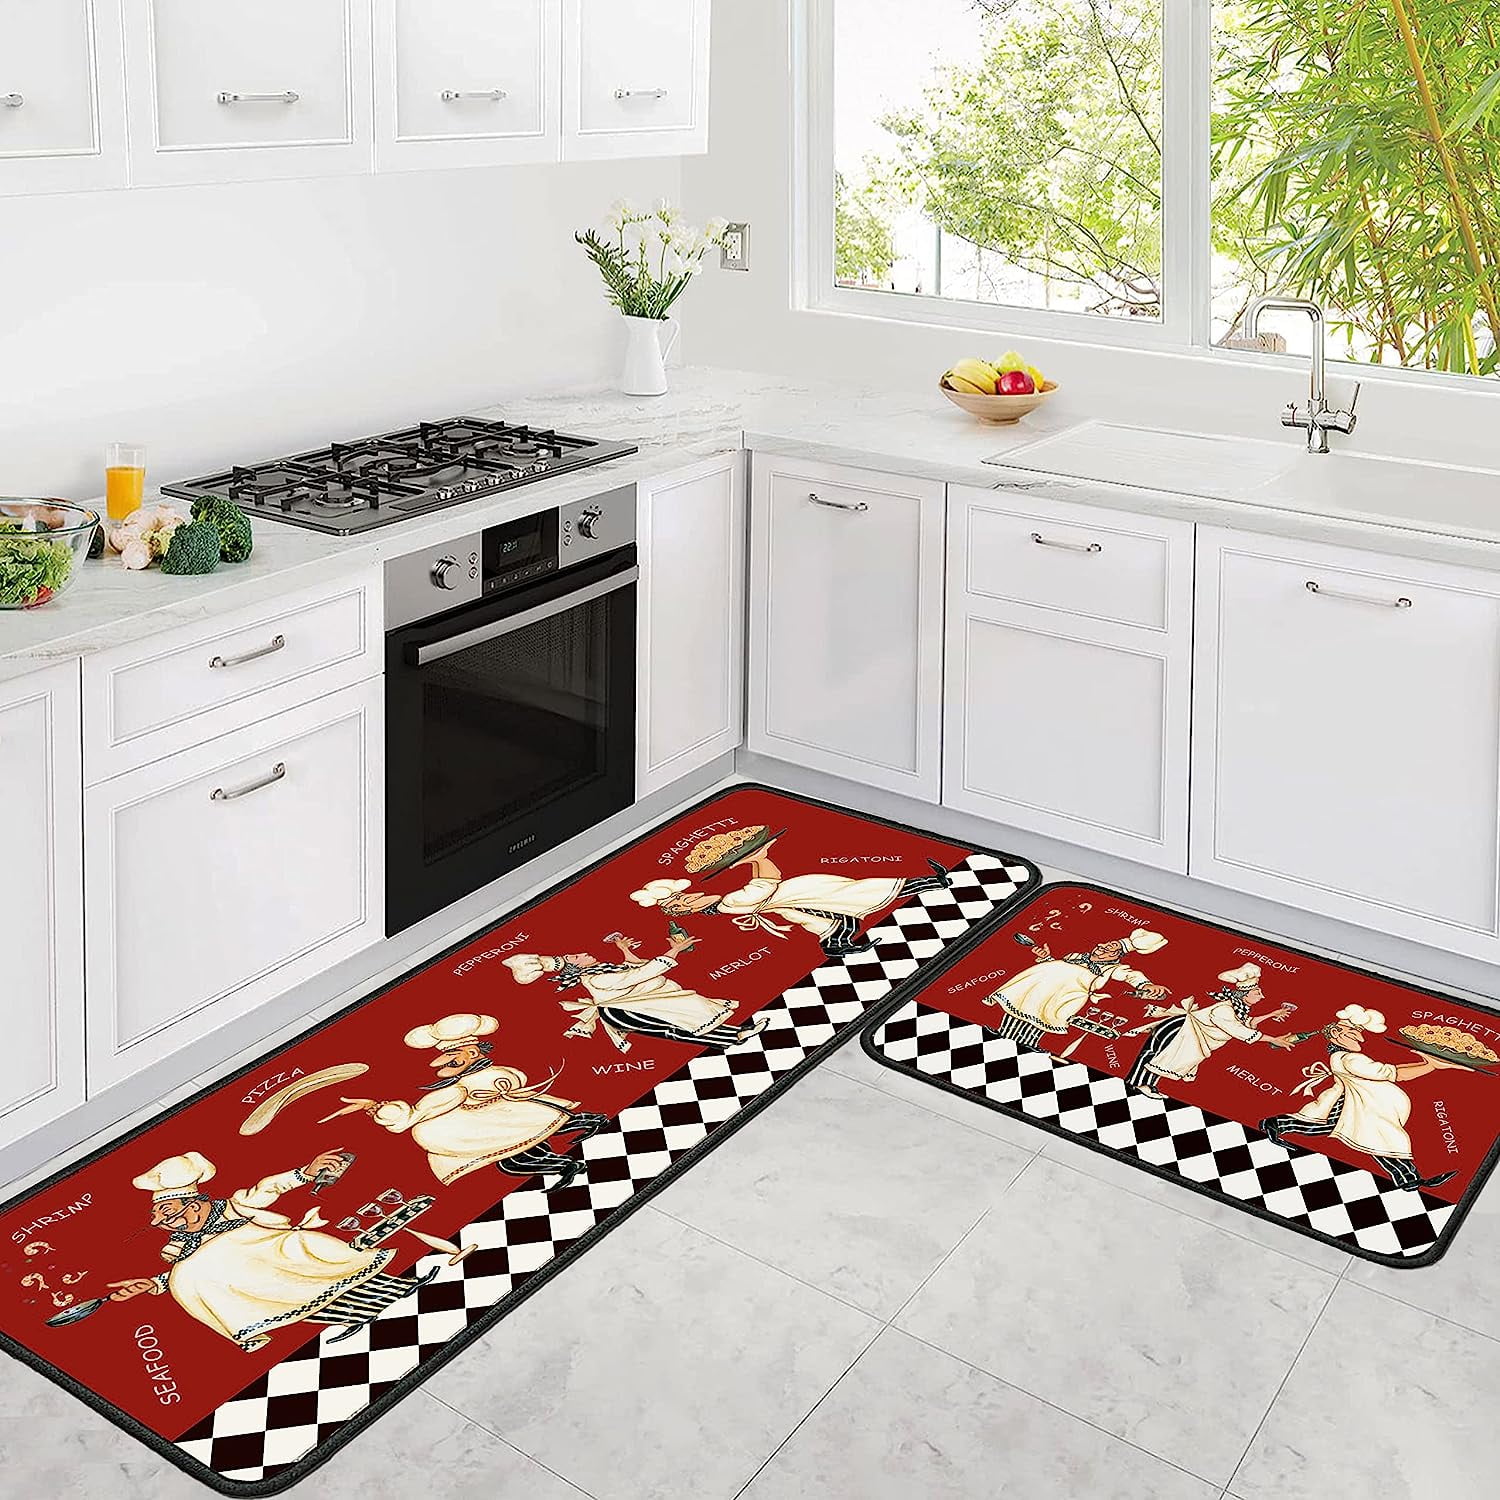 Fat Chef Rugs Kitchen Floor Mats for in Front of Sink, Anti Fatigue ...